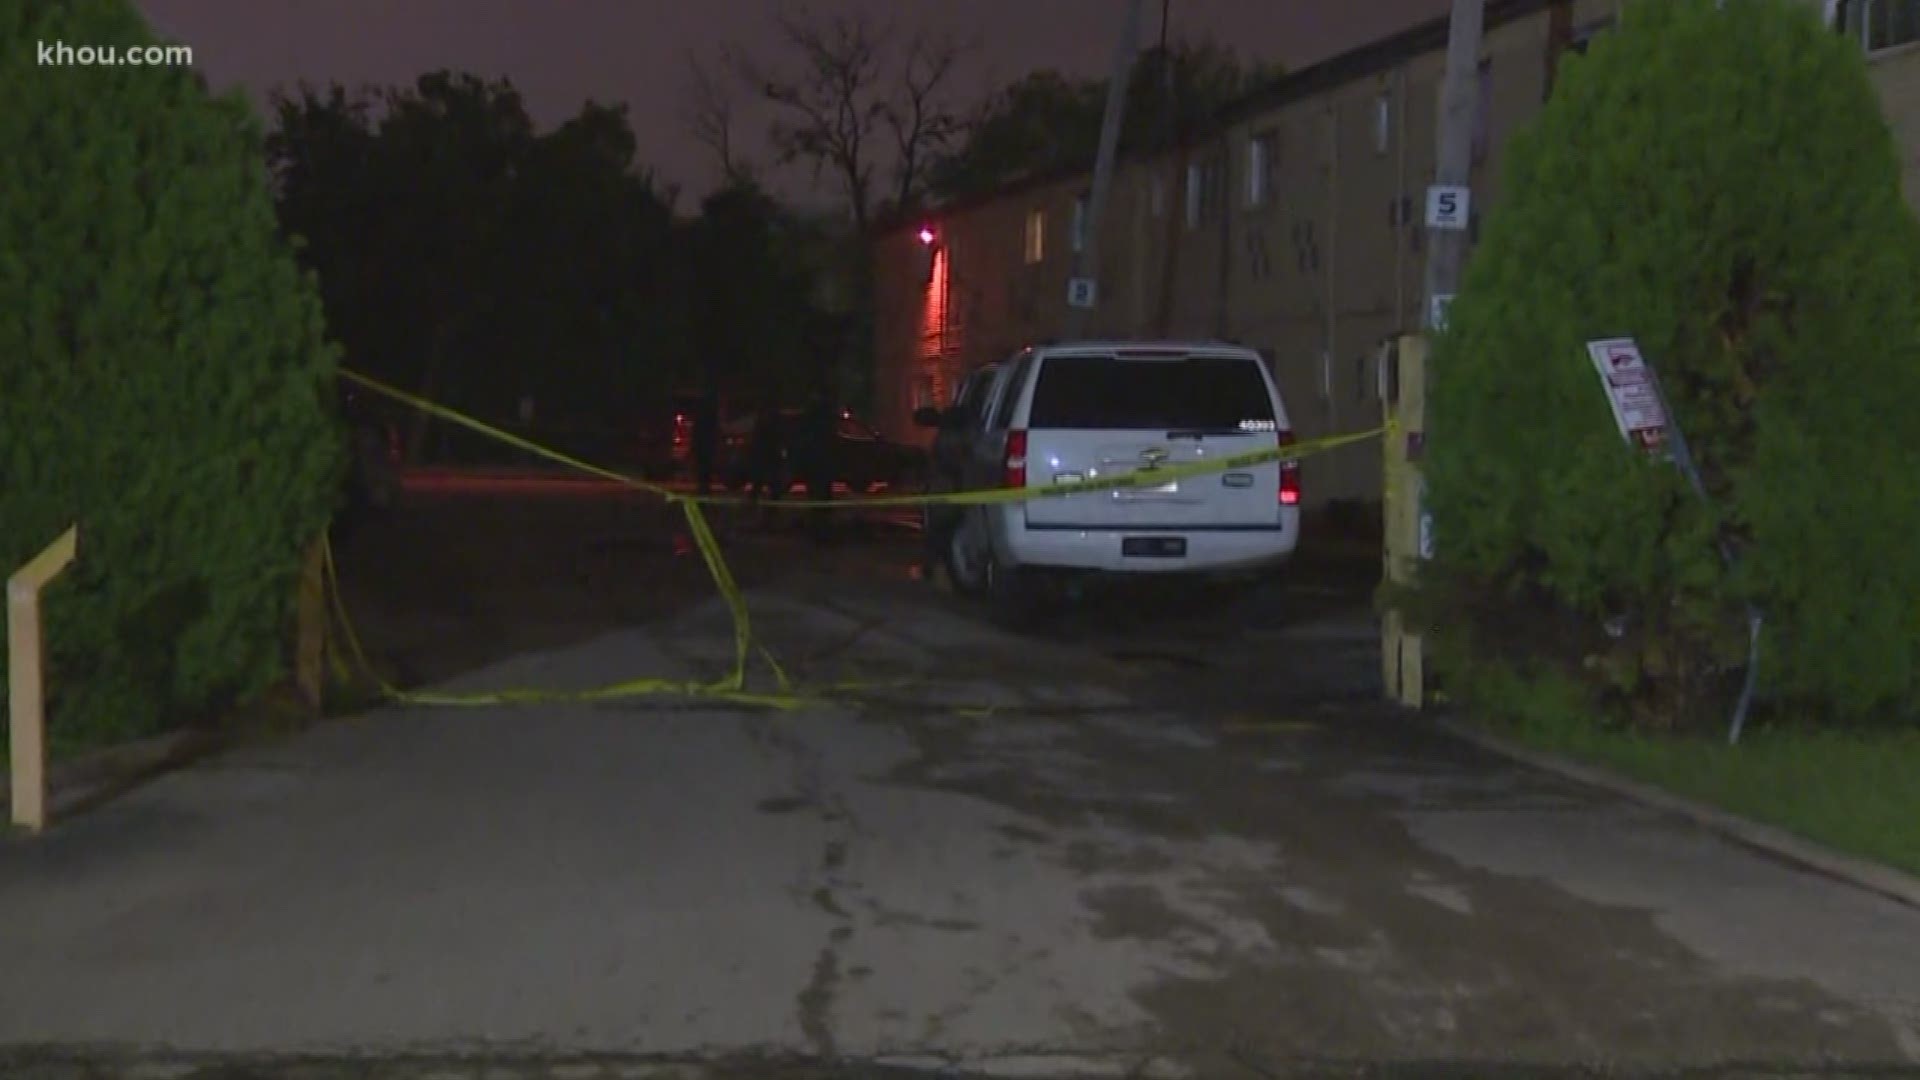 A teenager has died after he was shot to death Tuesday night at a southwest Houston apartment complex.